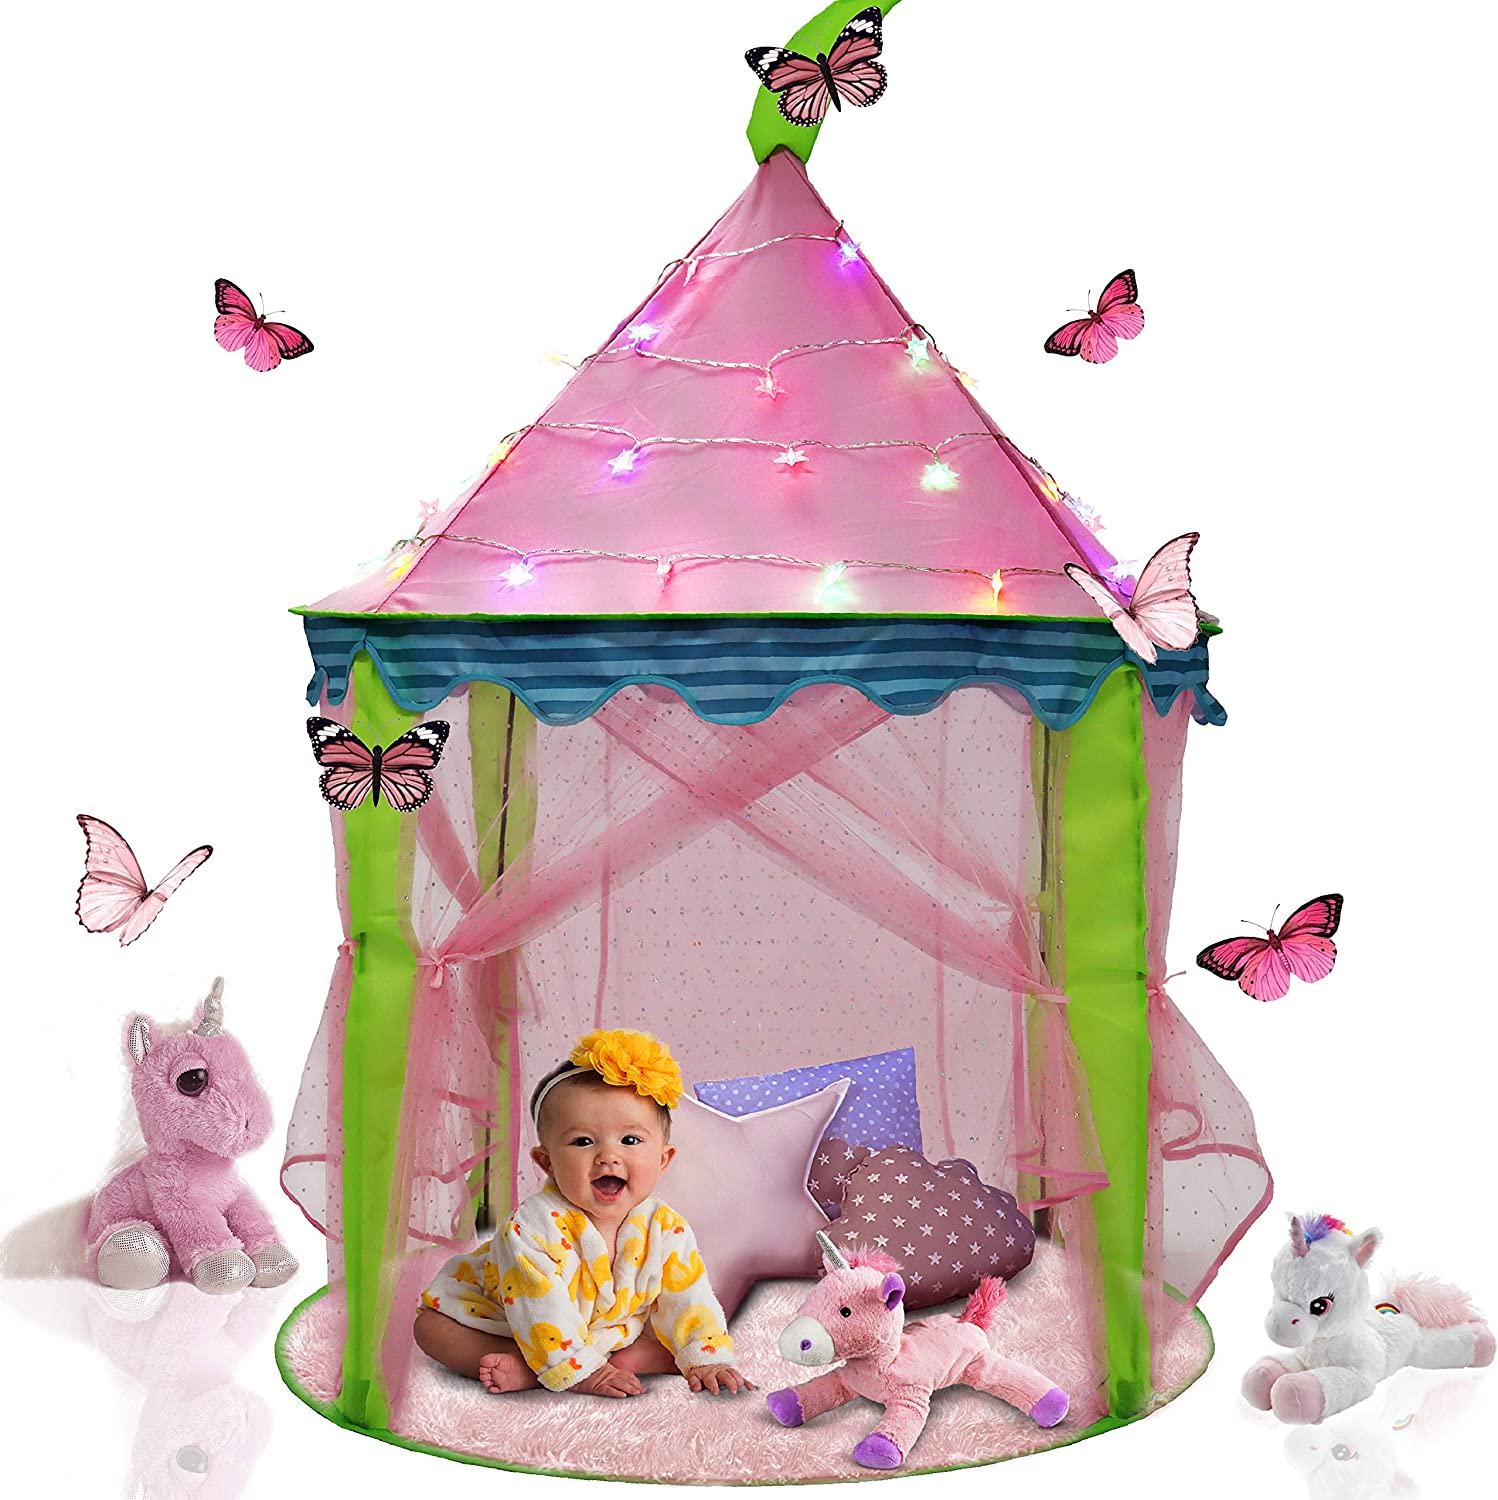 LimitlessFunN, LimitlessFunN Princess Castle Tent with Star Lights 41 X 55 Girls Playhouse Kids Play Tent for Children, Indoor and Outdoor, Pink